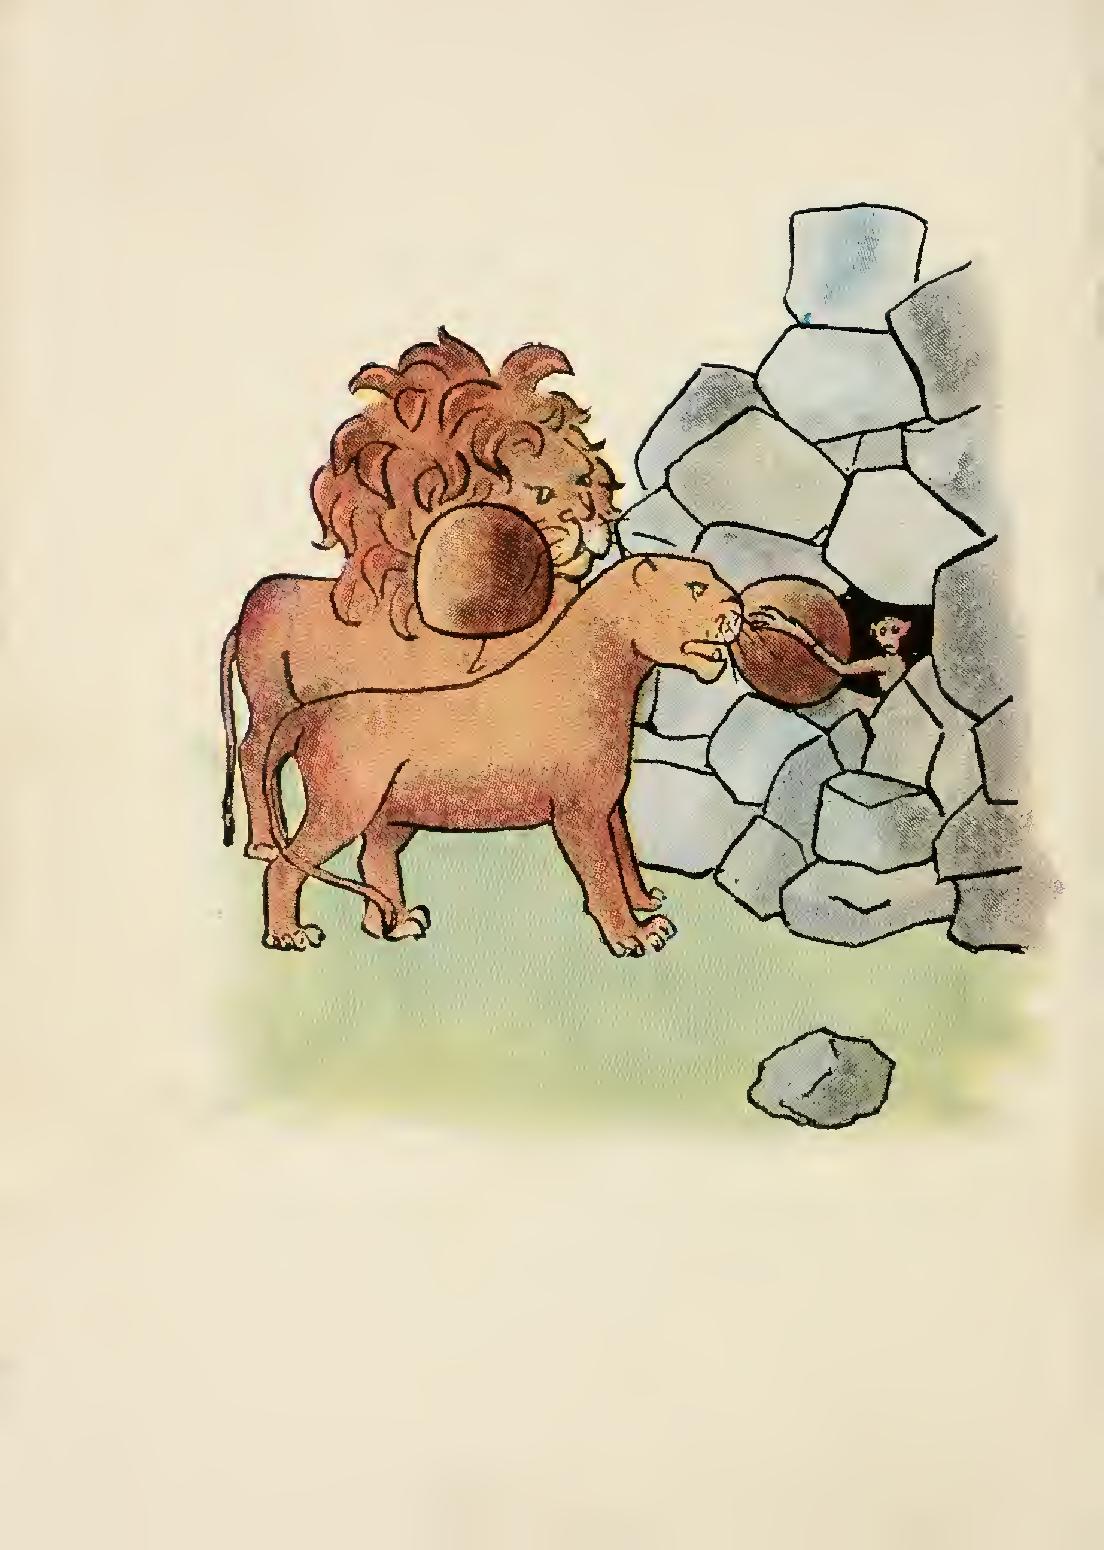 The monkey hides from the lions in a cave